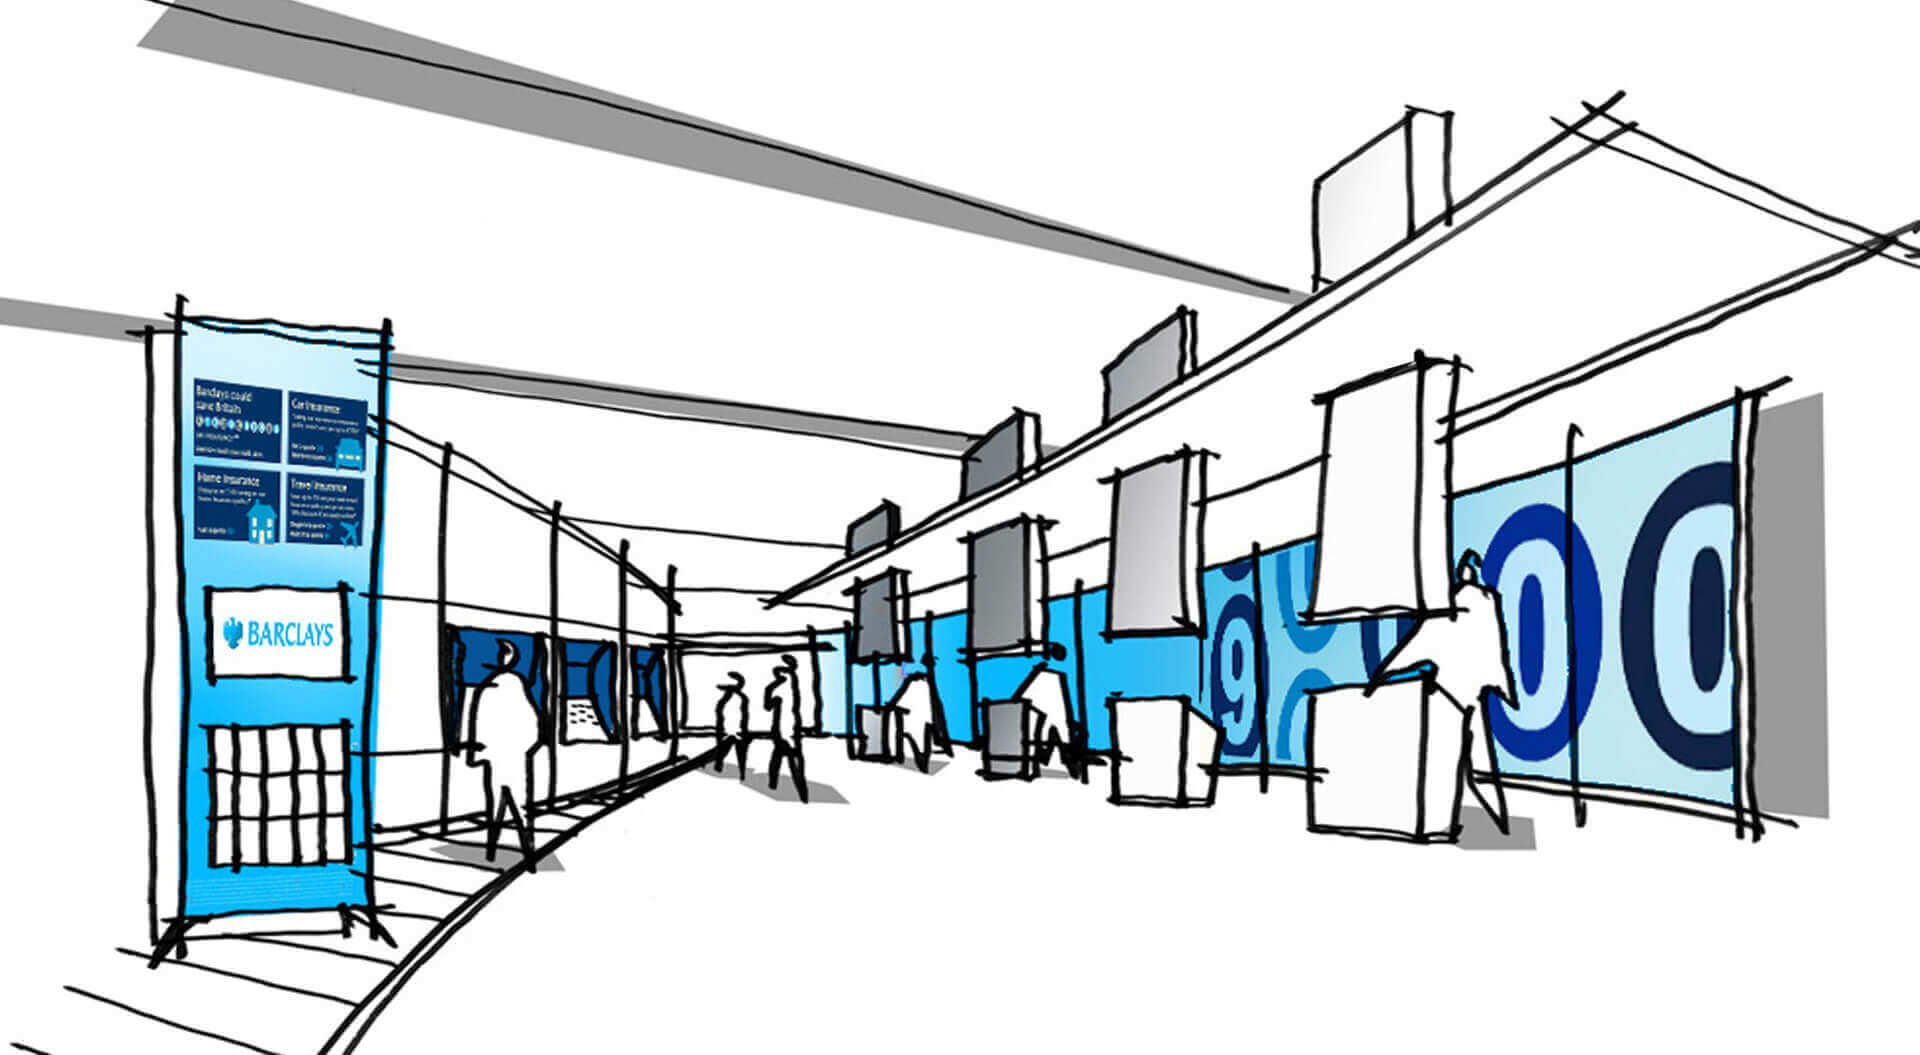 Barclays Bank Concept sketch visual ATM and technology lobby